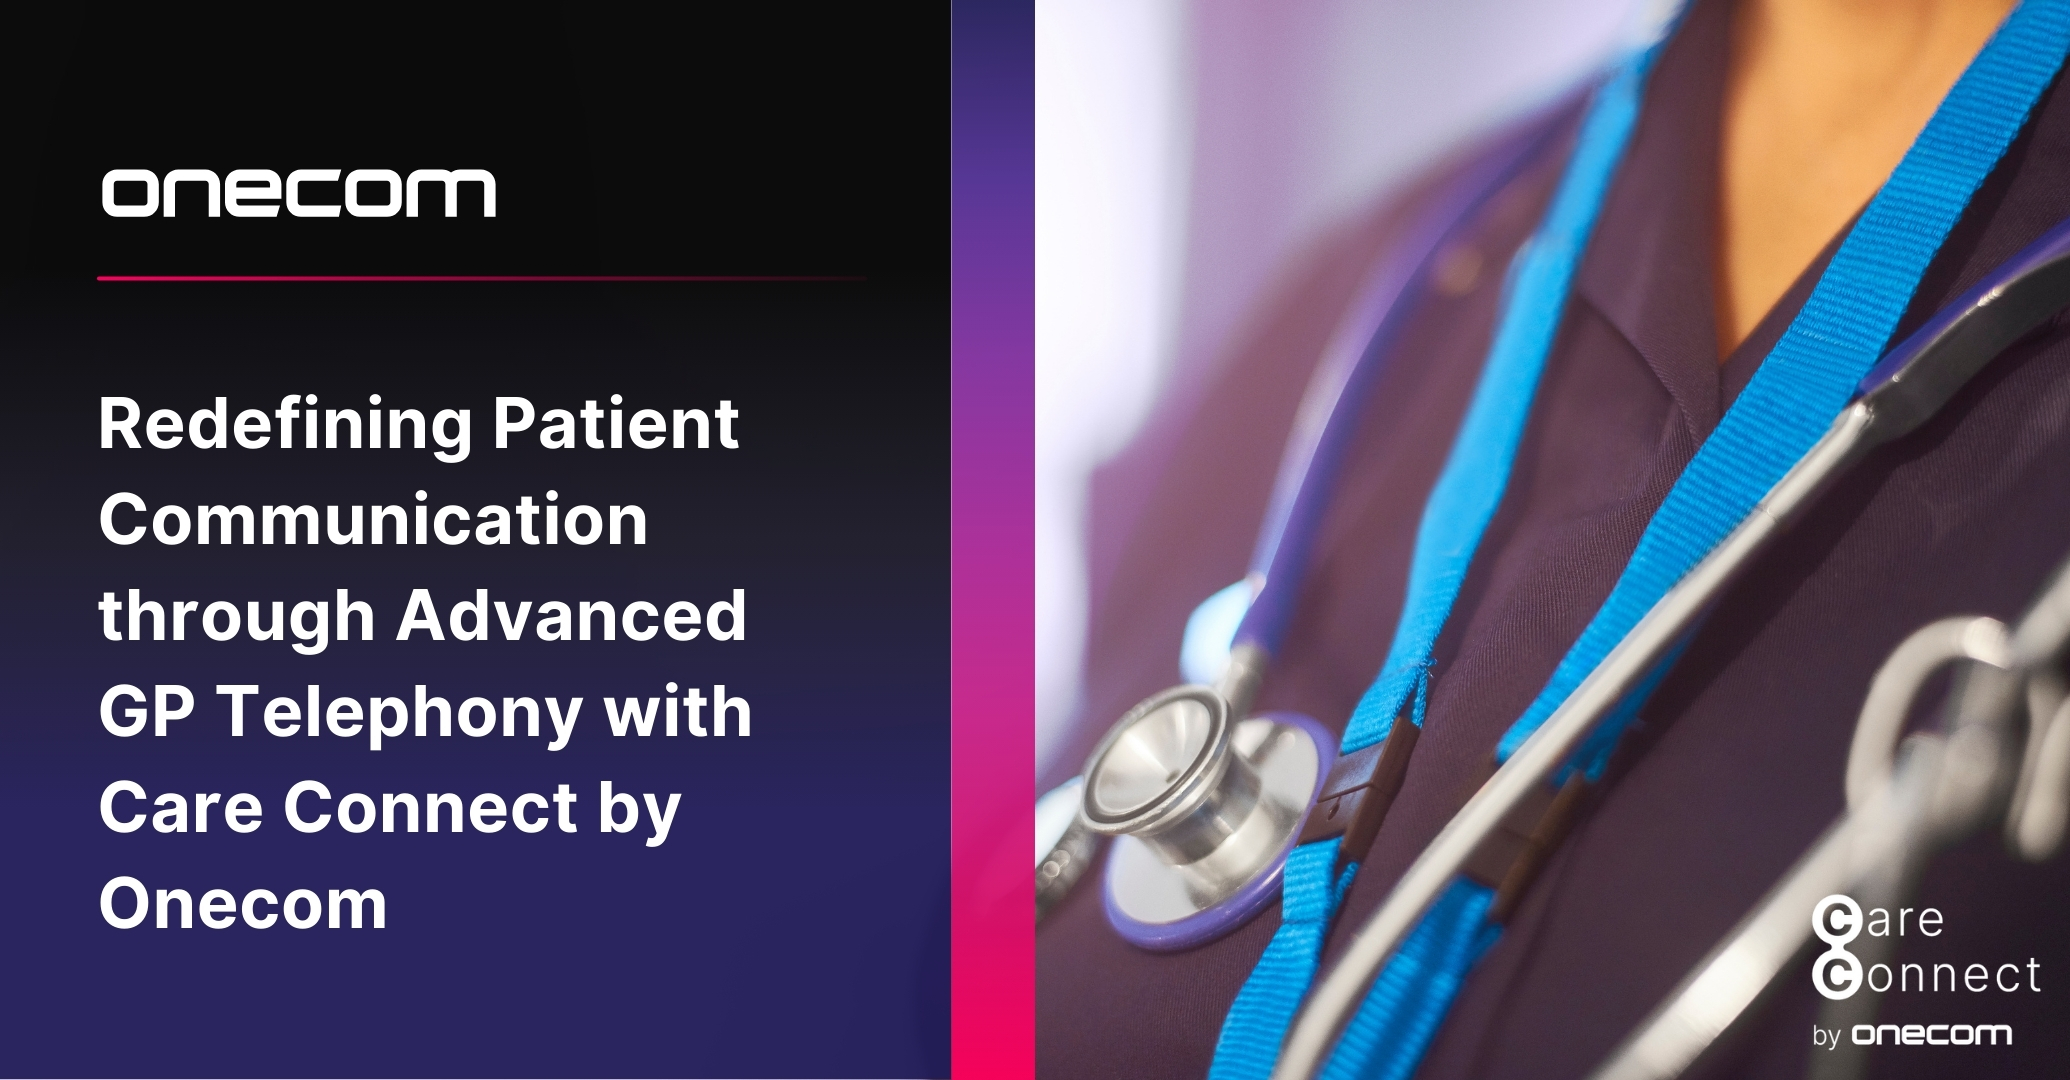 Redefining Patient Communication through Advanced GP Telephony with Care Connect by Onecom